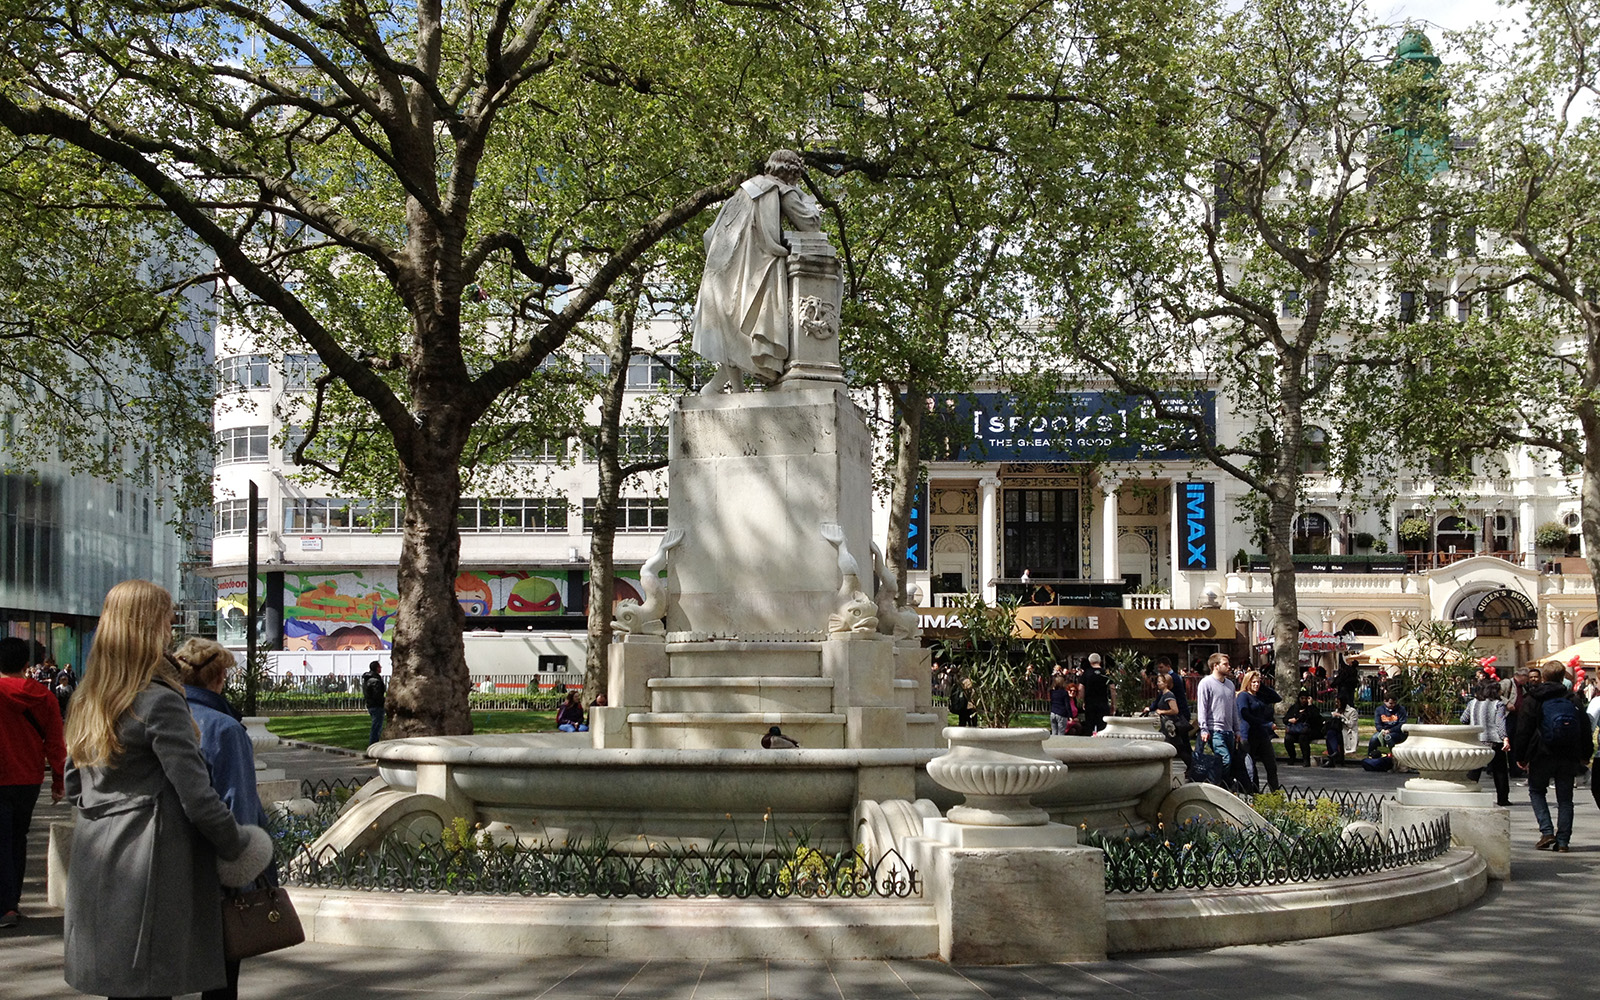 Leicester Square, May 2015